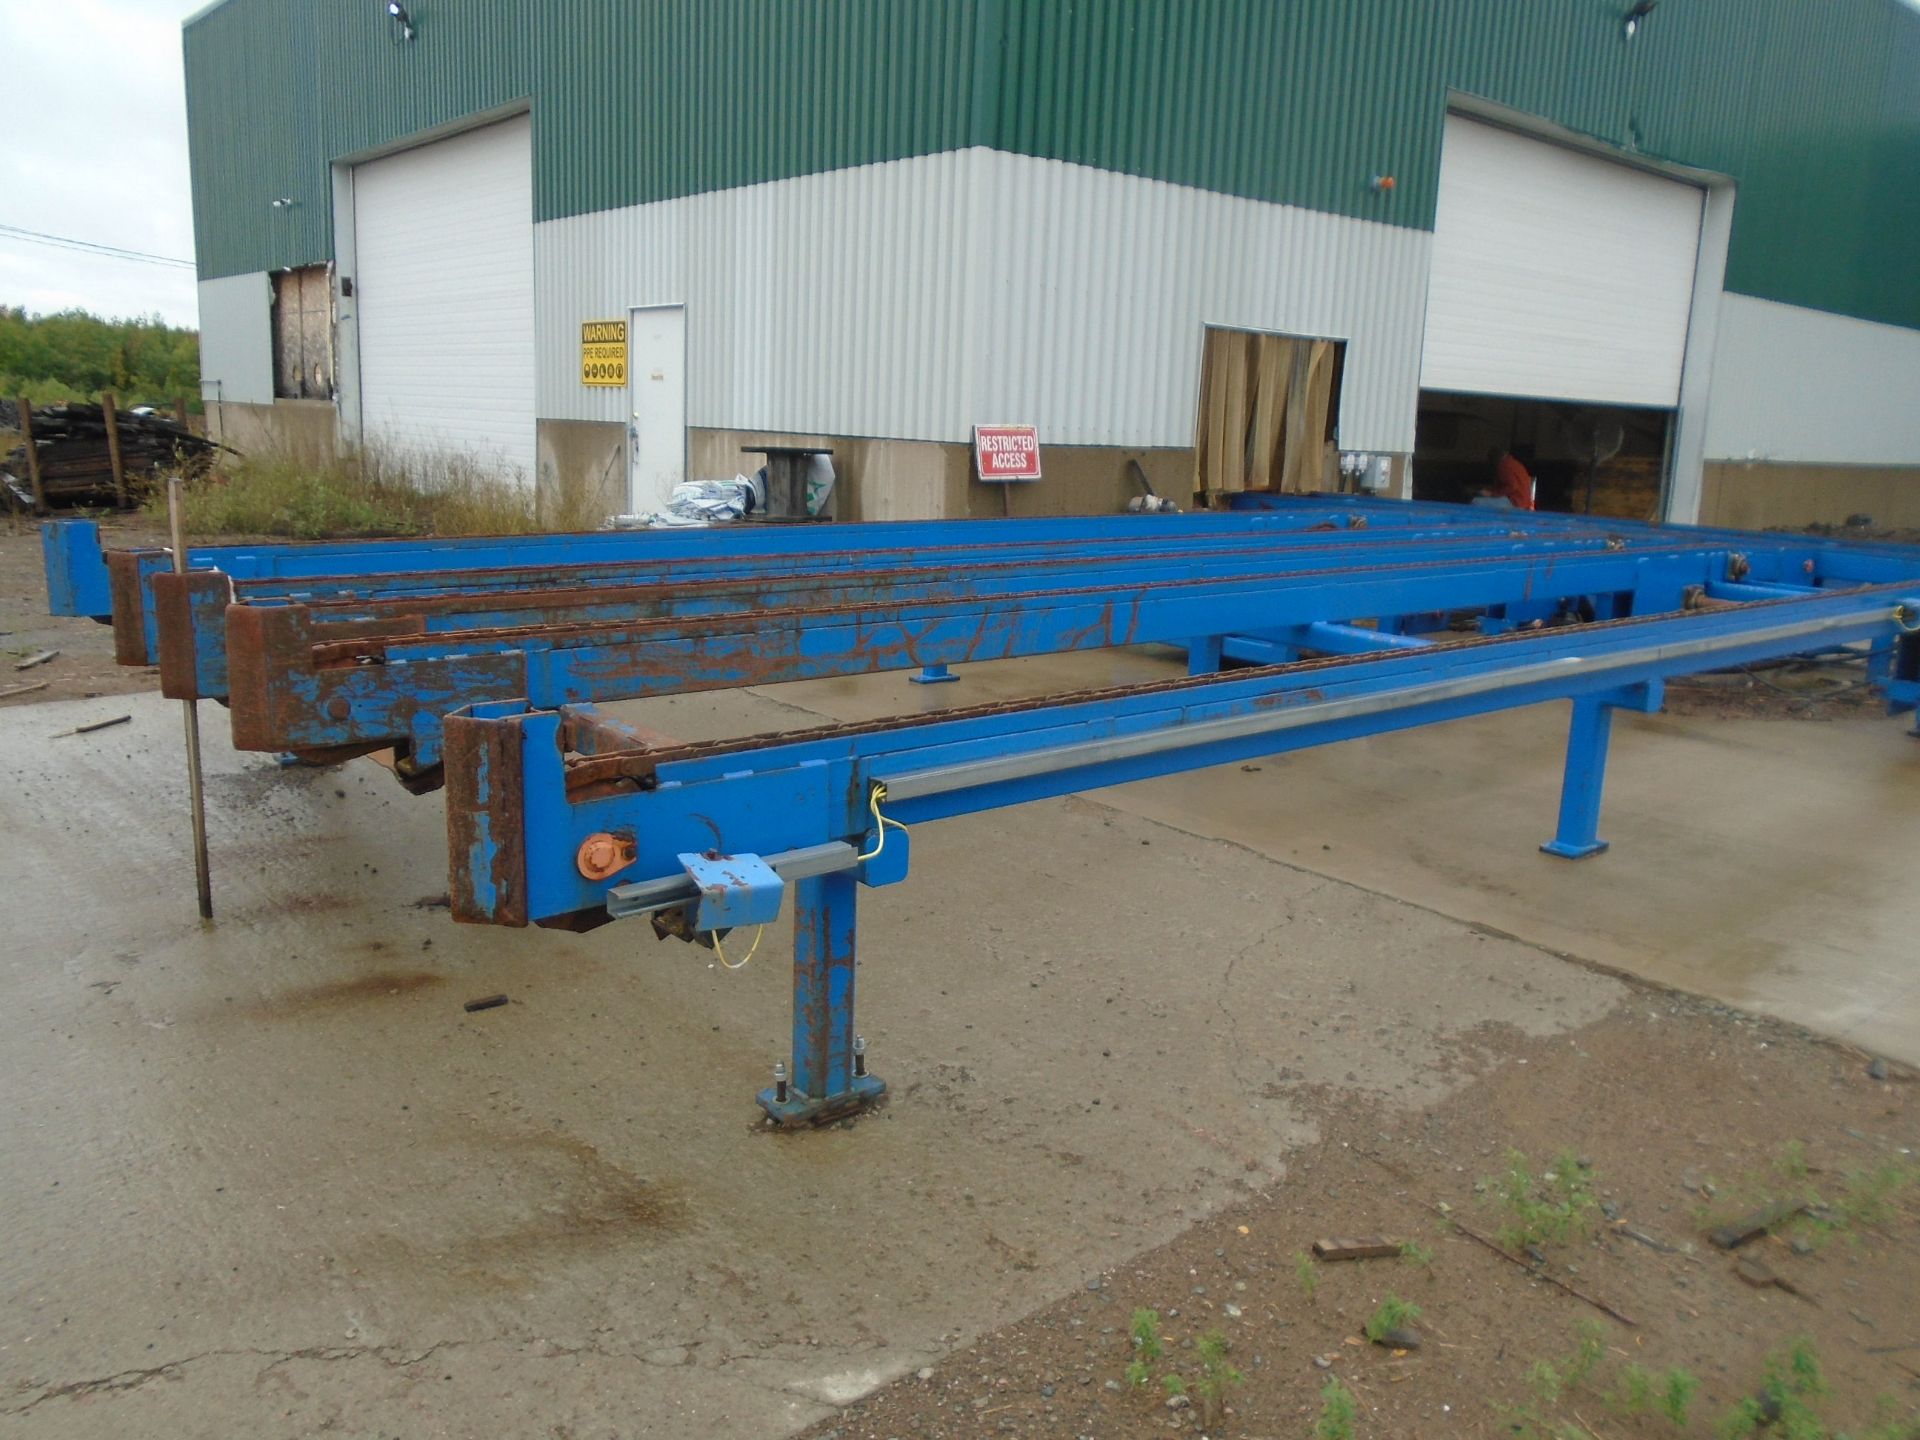 INOTECH (2015) 16' STACKER WITH 13' (5) CHAIN INFEED/TRANSFER CONVEYOR, UNSCRAMBLER WITH 17'W (15) - Image 4 of 8